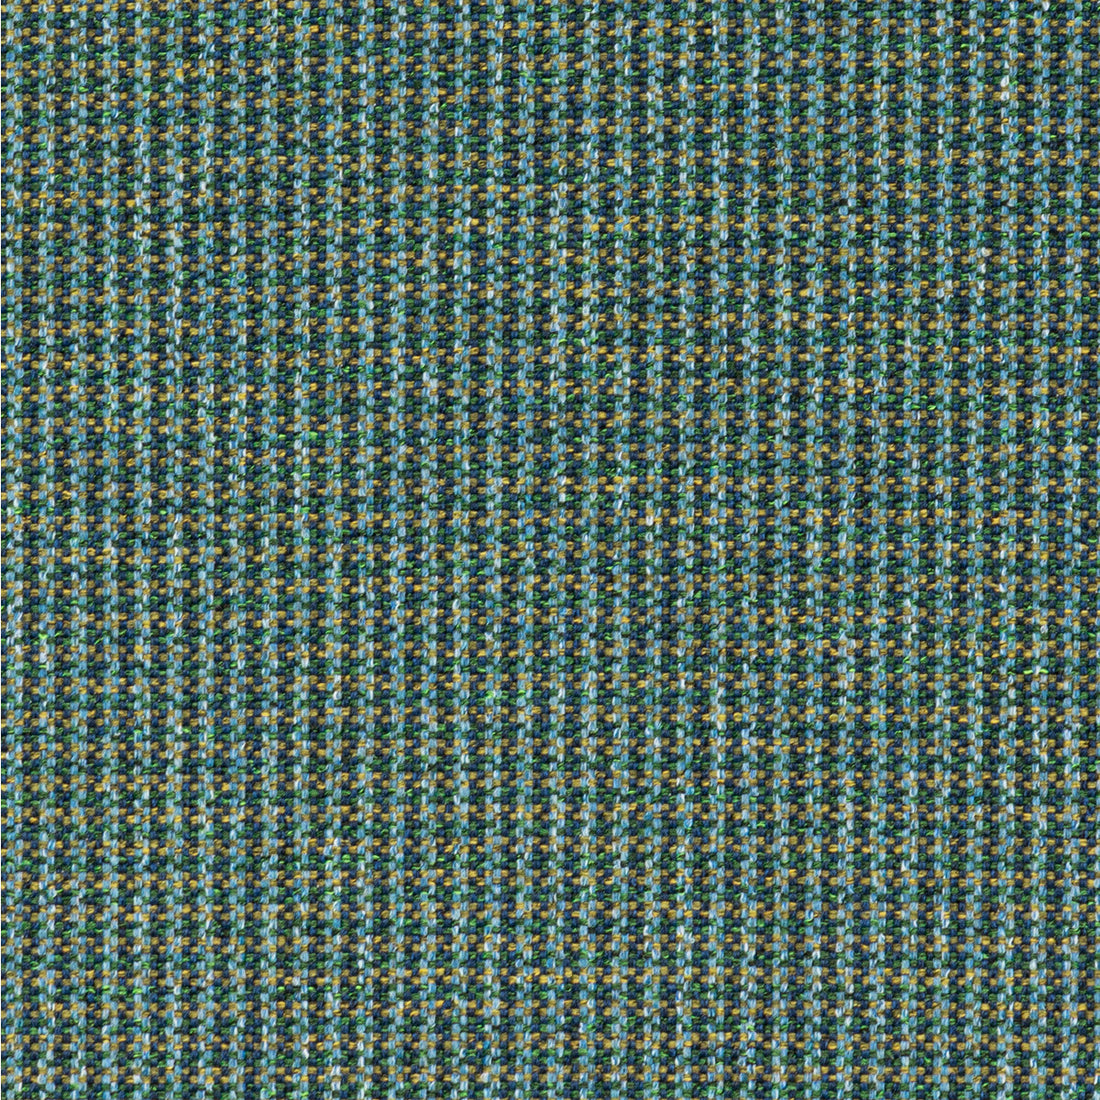 Steamboat fabric in woodland color - pattern 36258.350.0 - by Kravet Contract in the Supreen collection